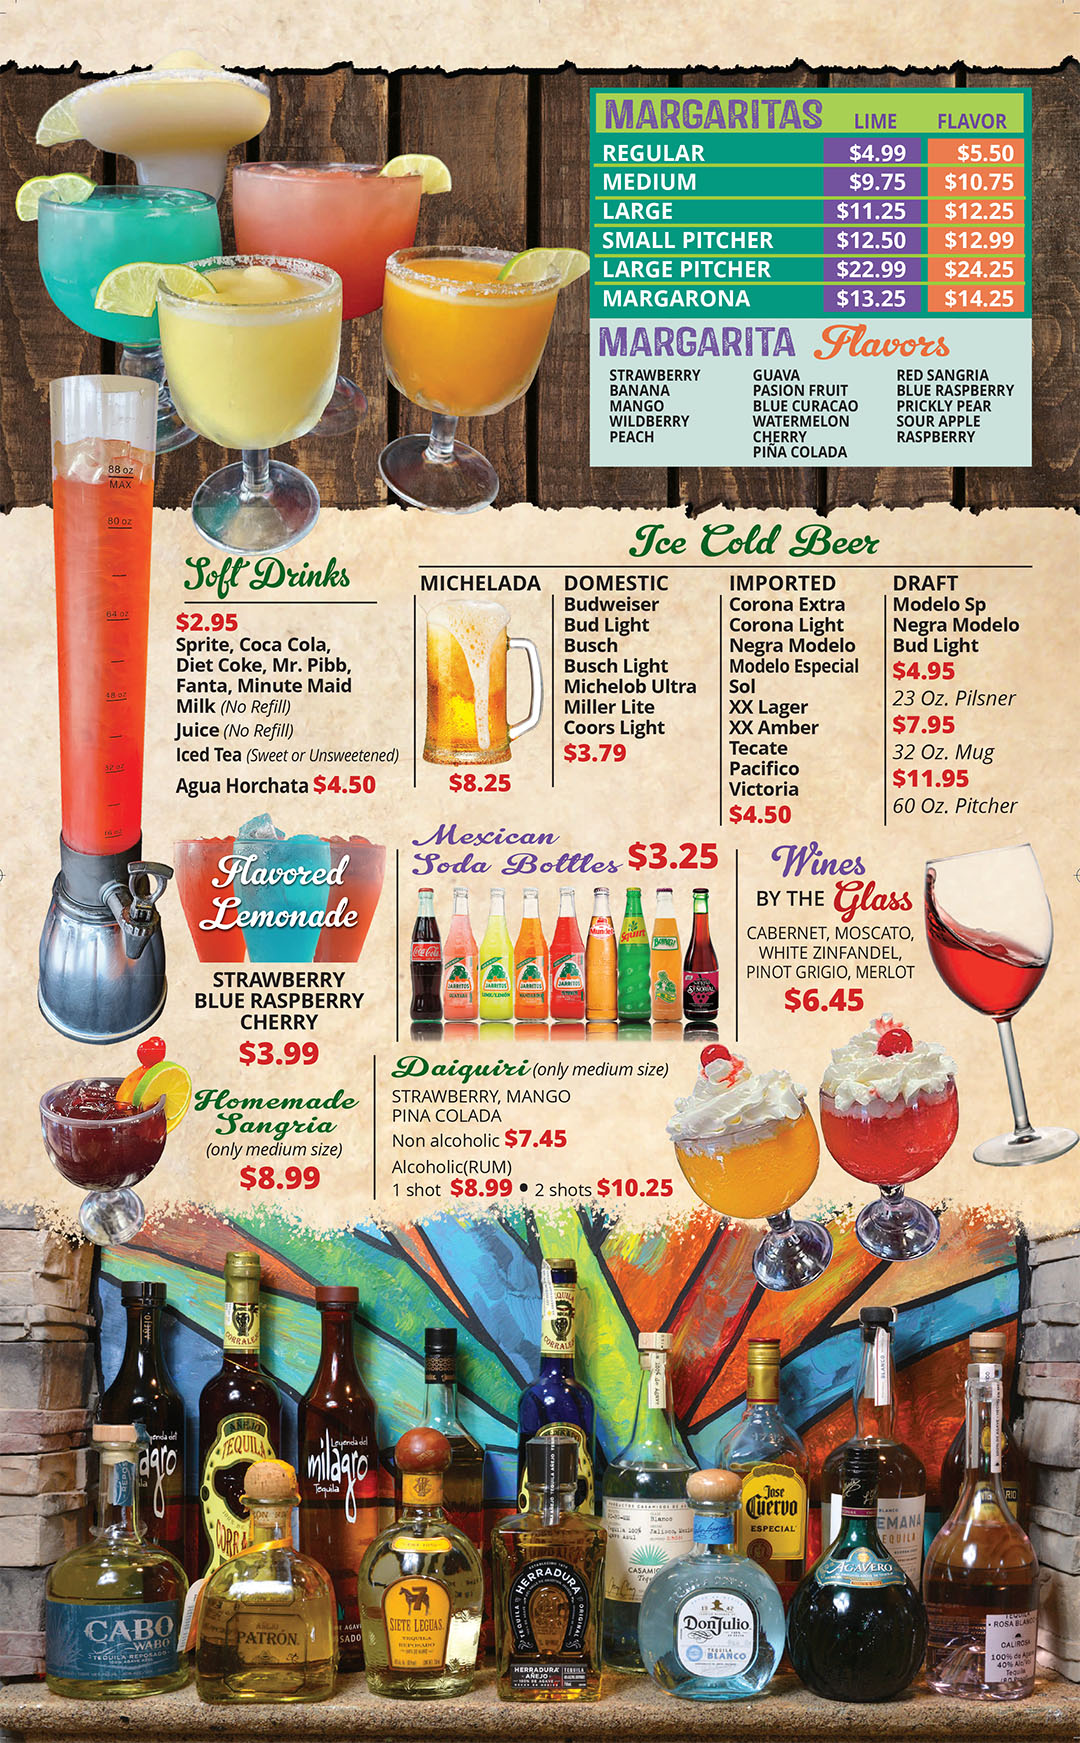 El Maguey Mexican Restaurant drinks selection